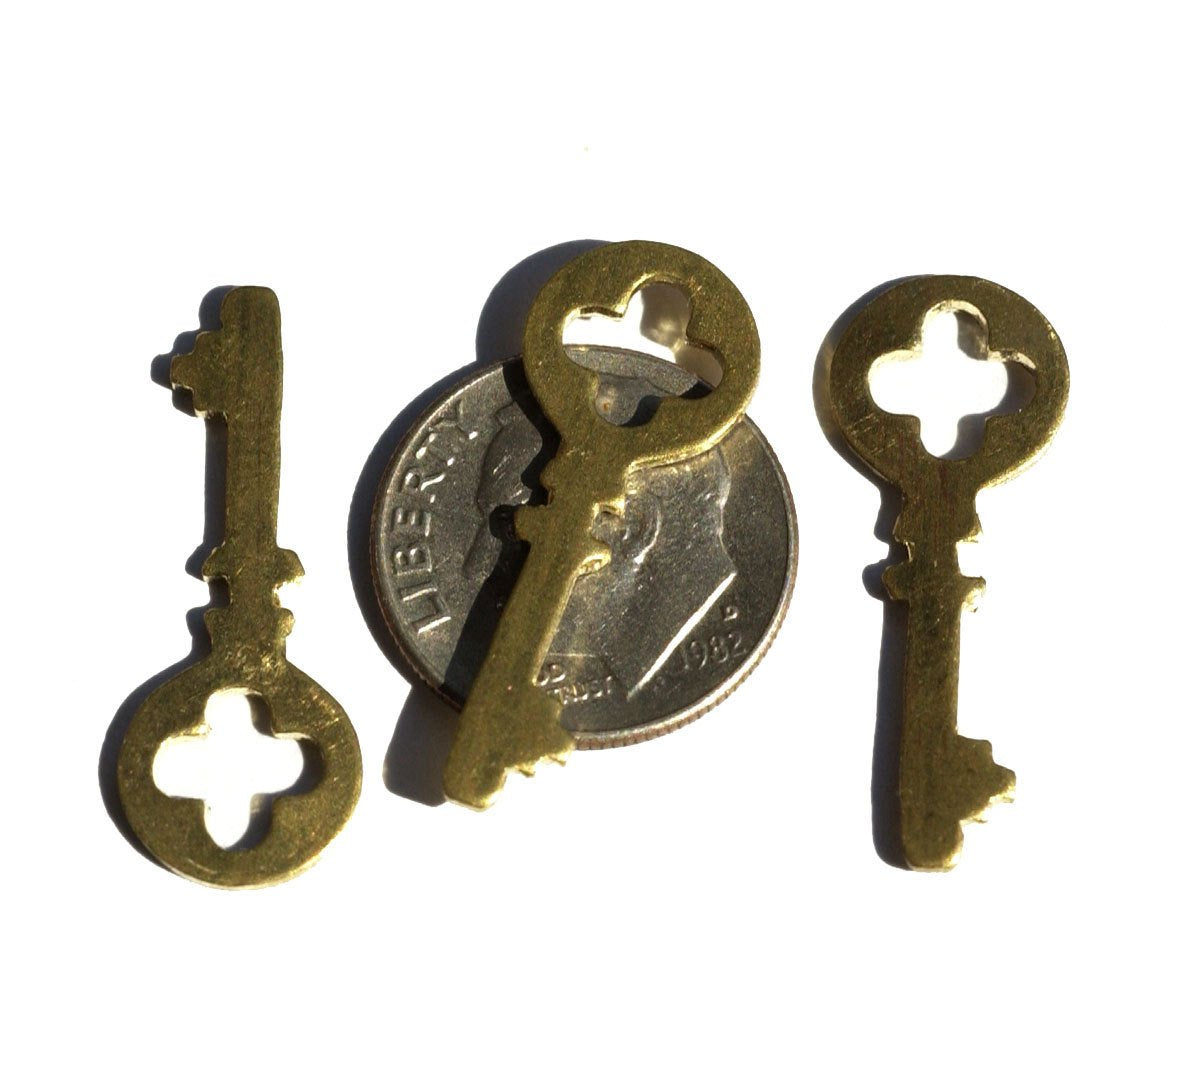 Brass Blank Key Cross Skeleton Mini  27mm x 10mm Cutout for Blanks Metalwork Soldering Stamping Texturing - 8 pieces